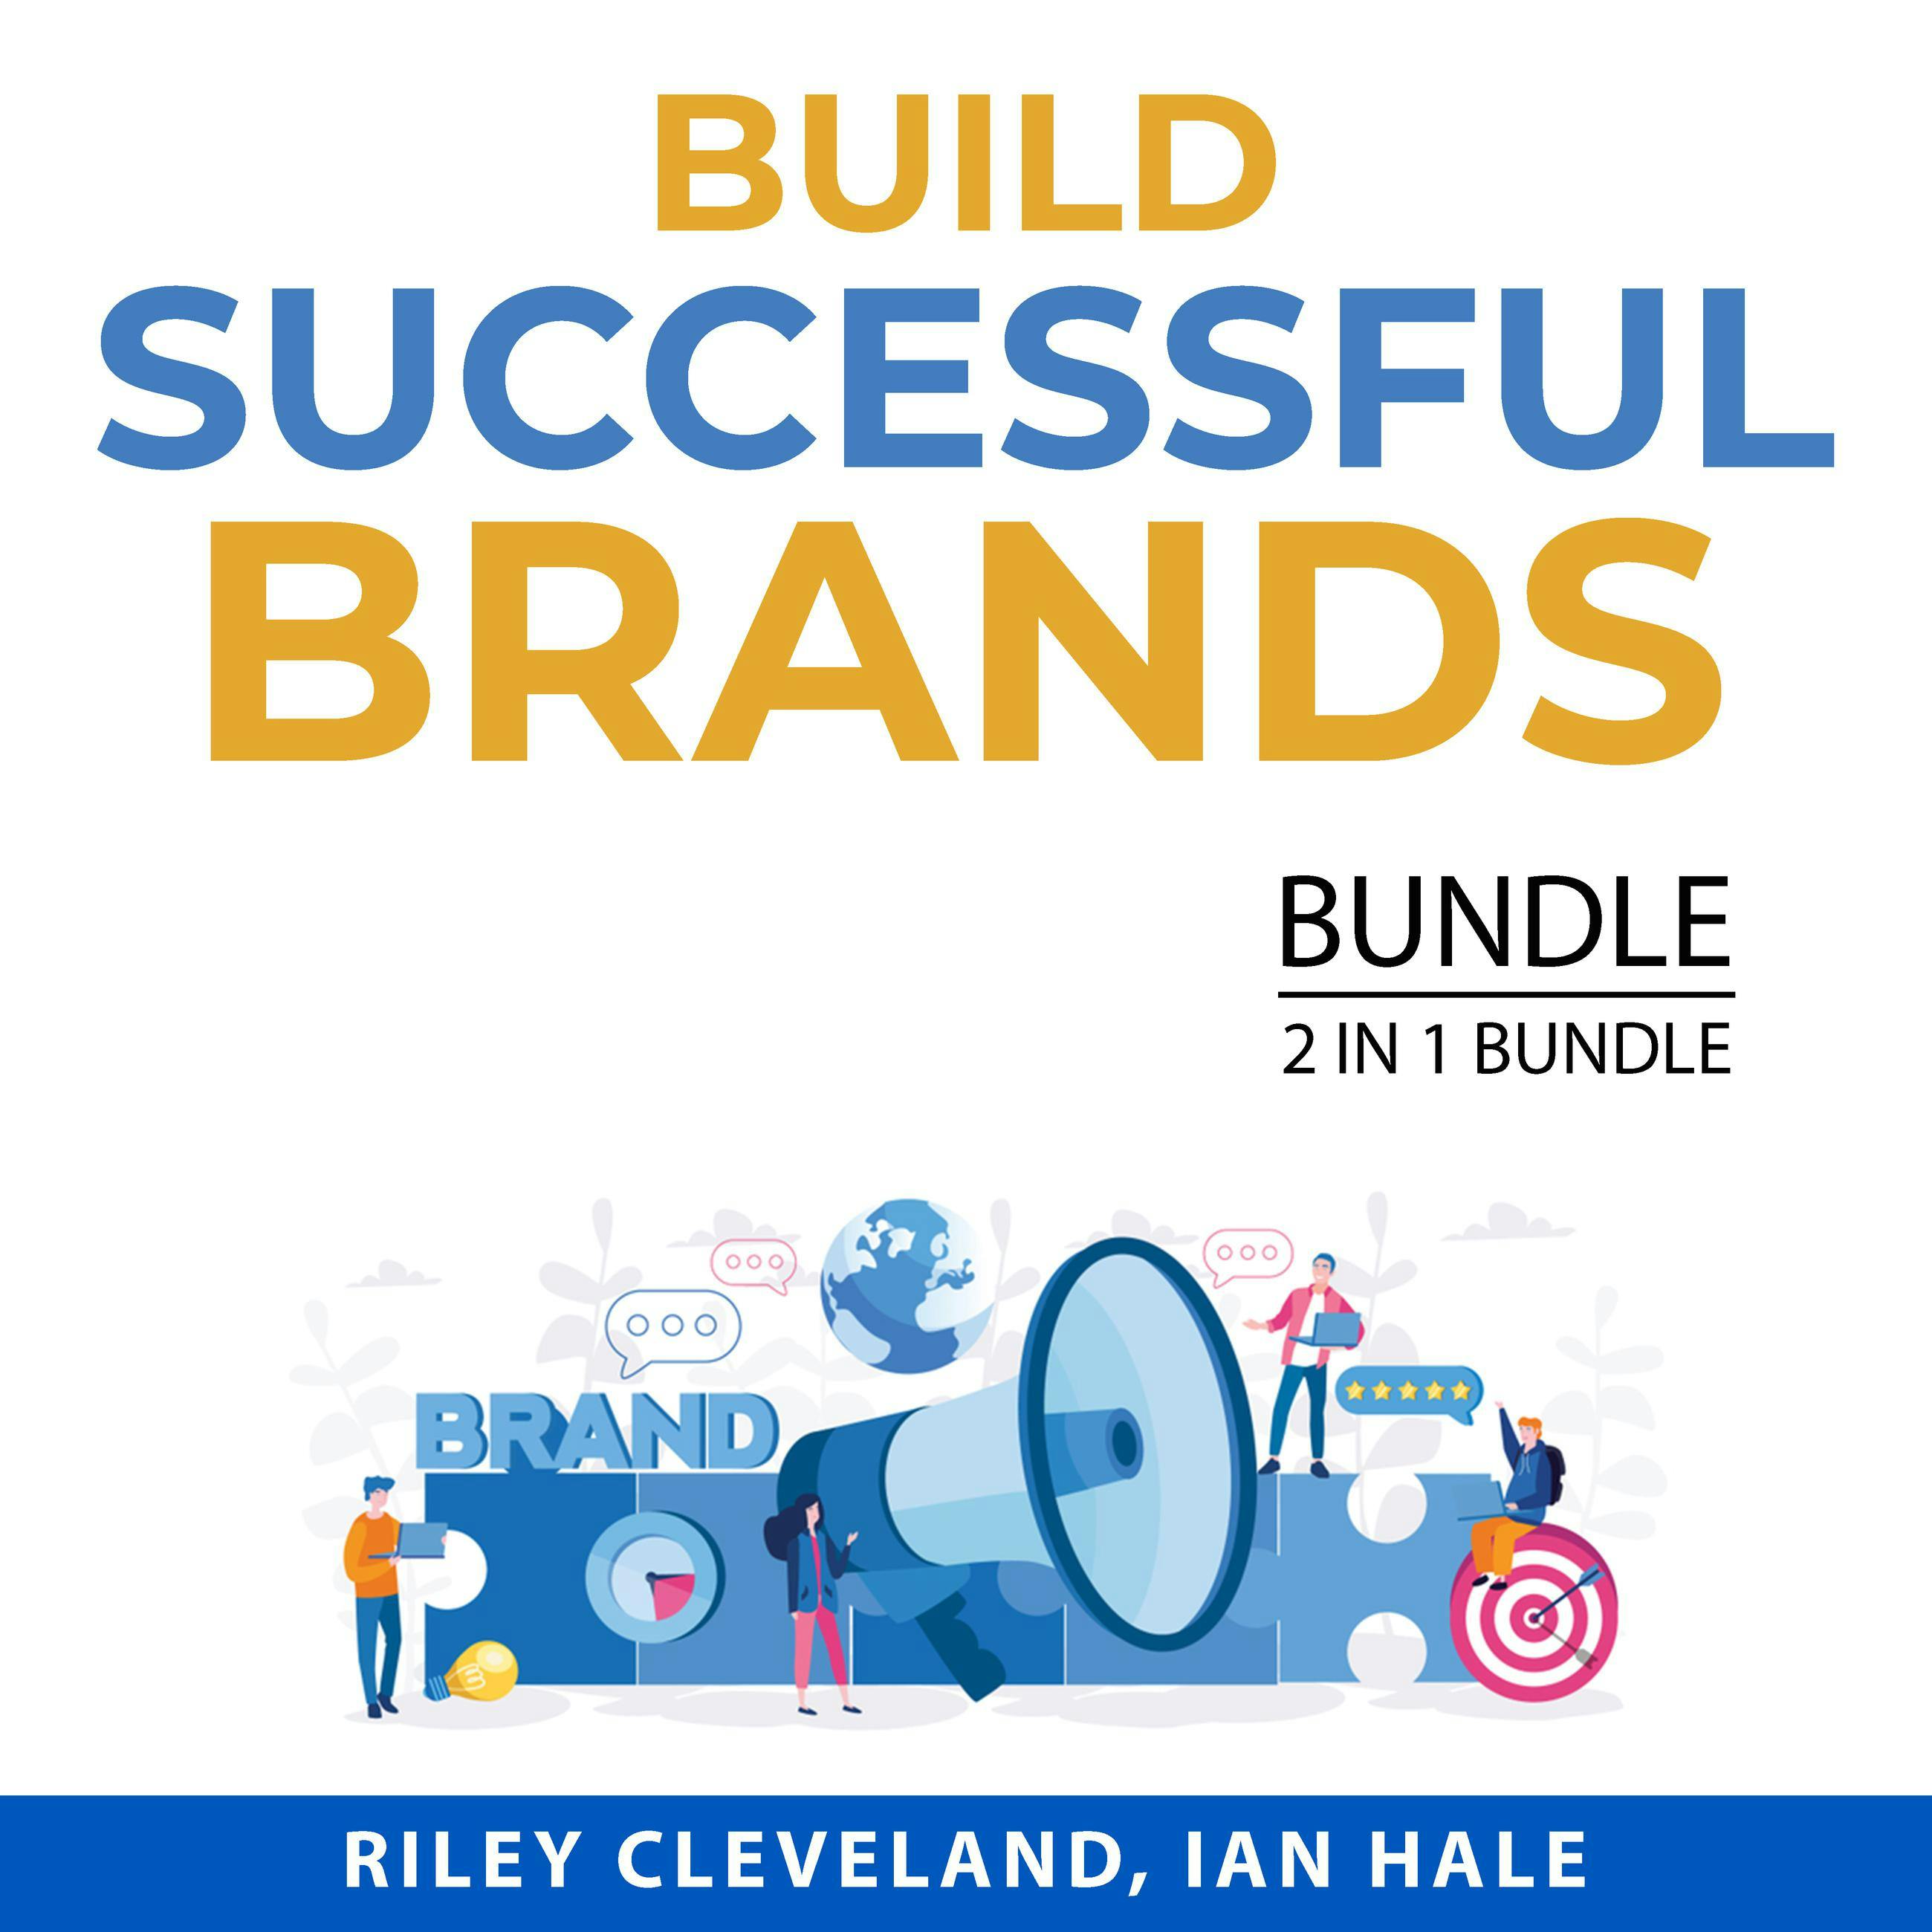 Build Successful Brands Bundle, 2 in 1 Bundle: Build Brand Authority and Branding Power - Ian Hale, Riley Cleveland